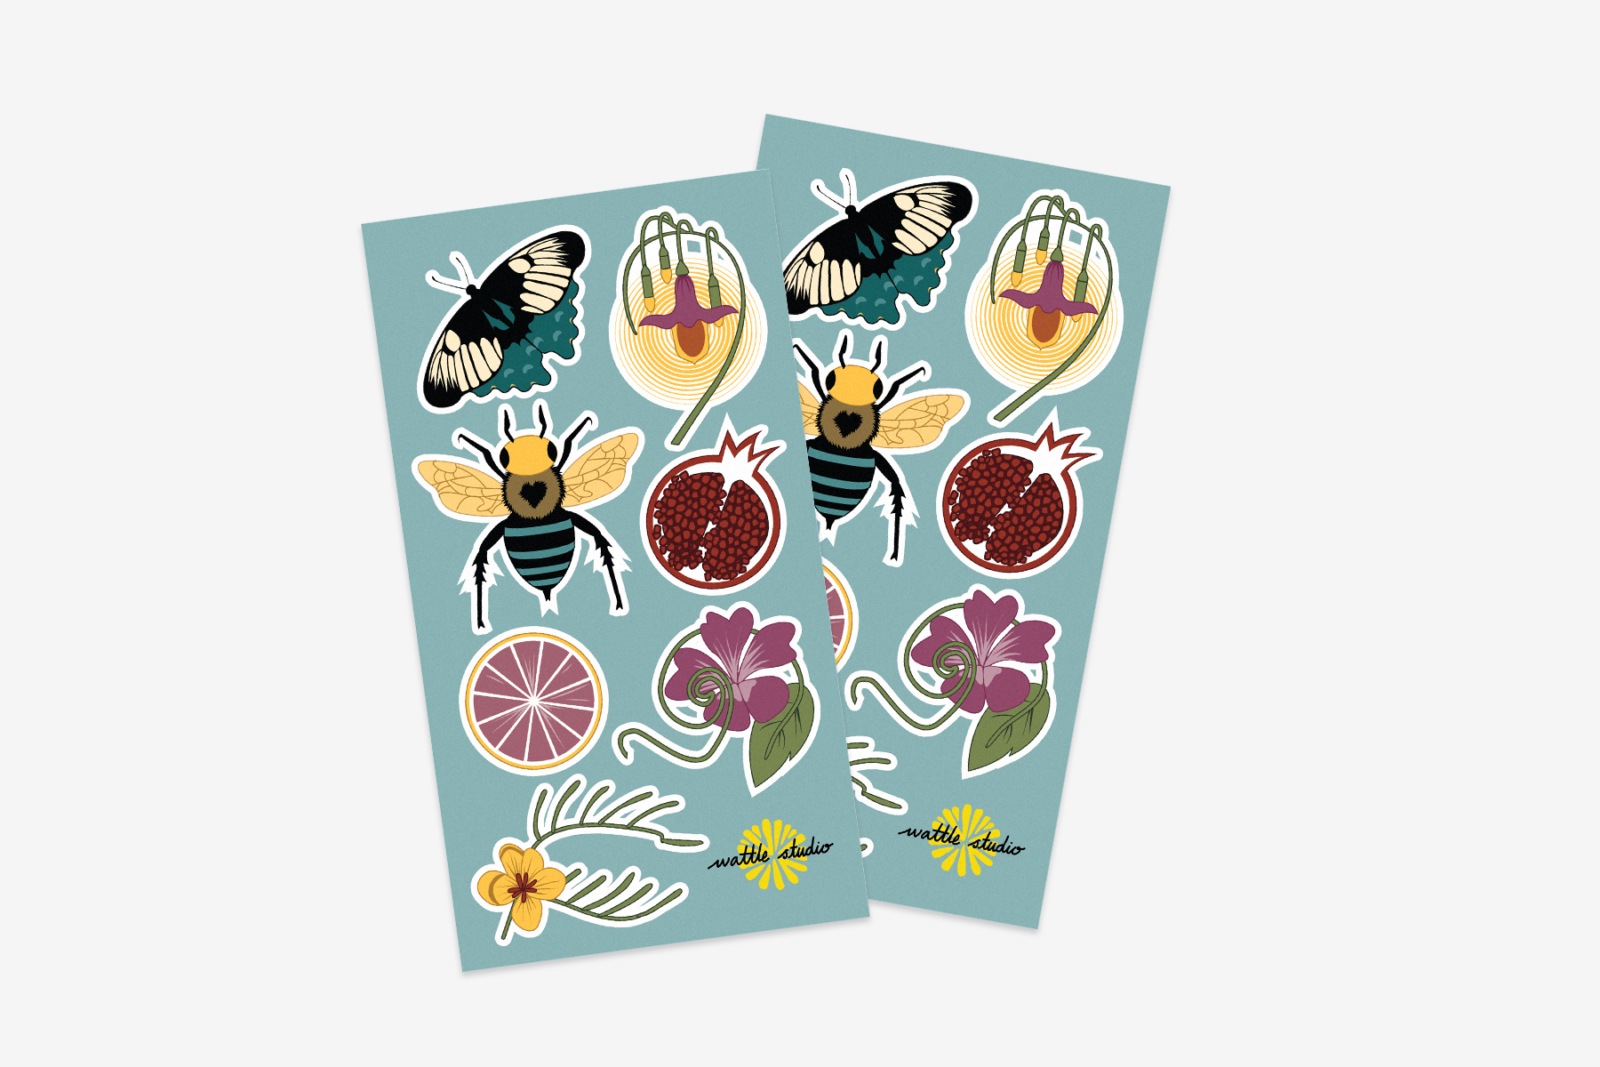 Two sheets of stickers on a white background. The designs include insects, flowers, and fruit. 